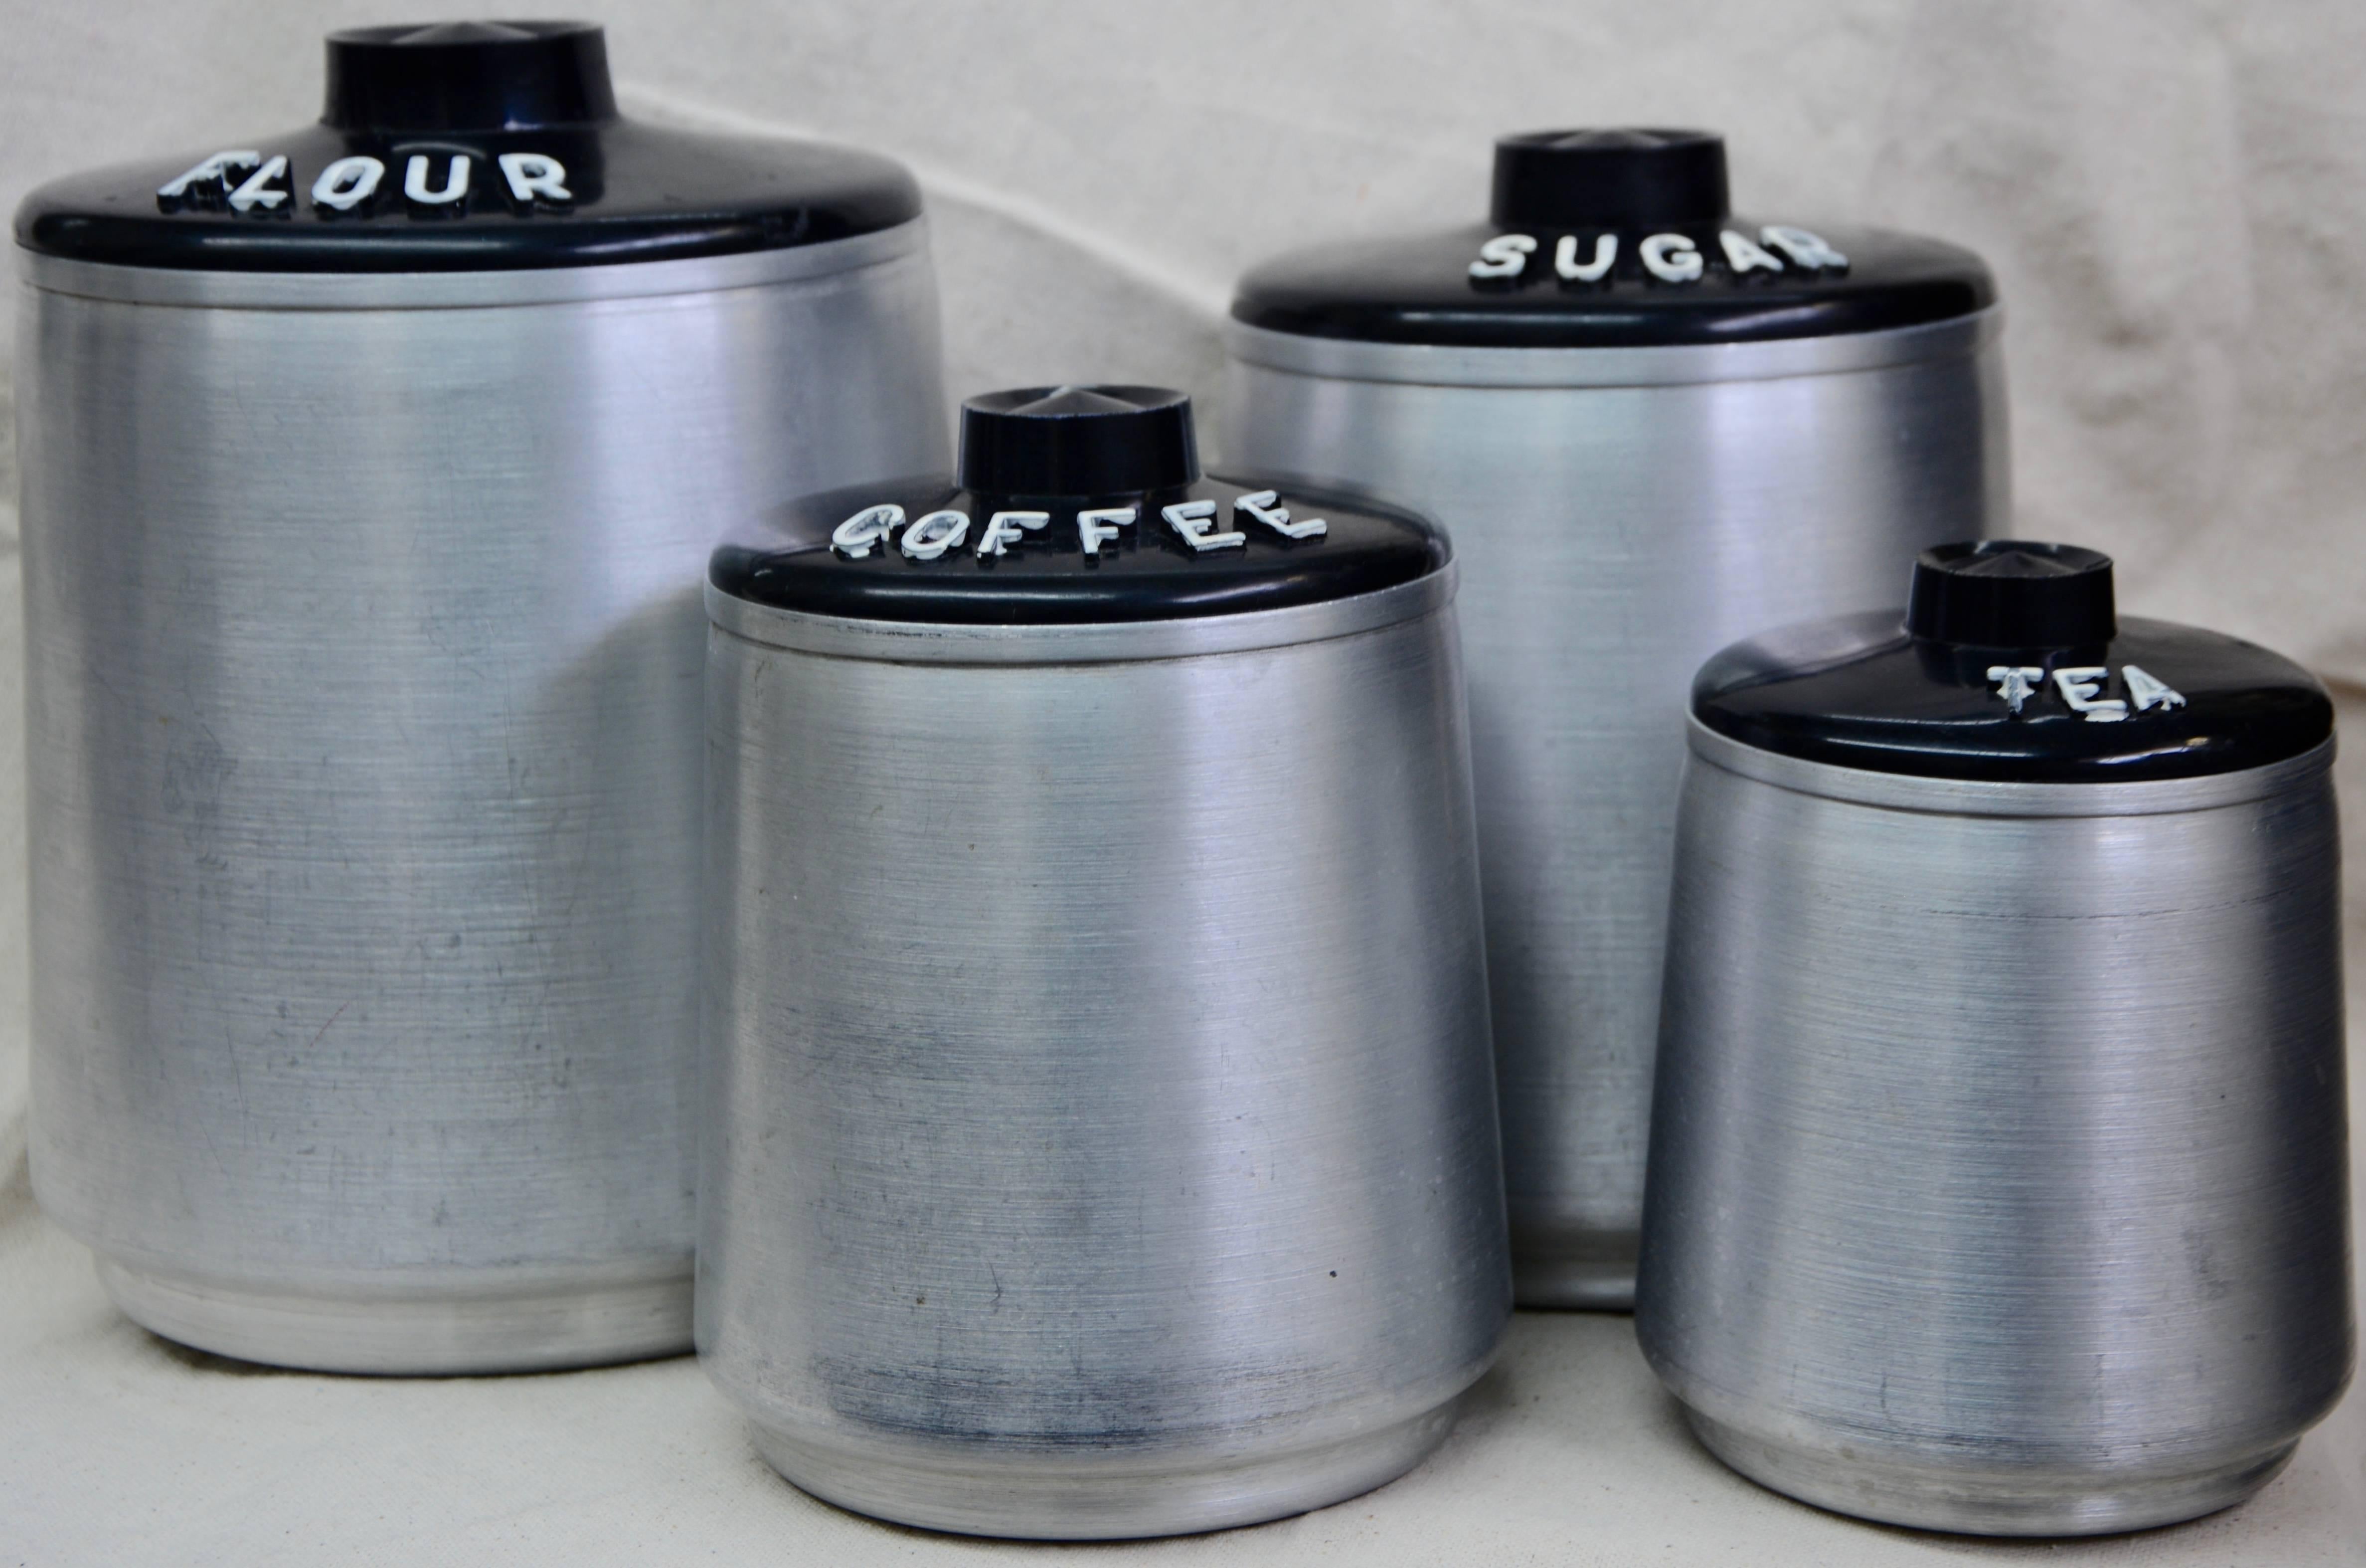 We are offering a vintage, midcentury Kromex by Alcoa brushed aluminium canister set. The canisters feature black plastic lids marked flour, sugar, tea, and coffee. Each lid is marked on the underside, Kromex. The words are highlighted in